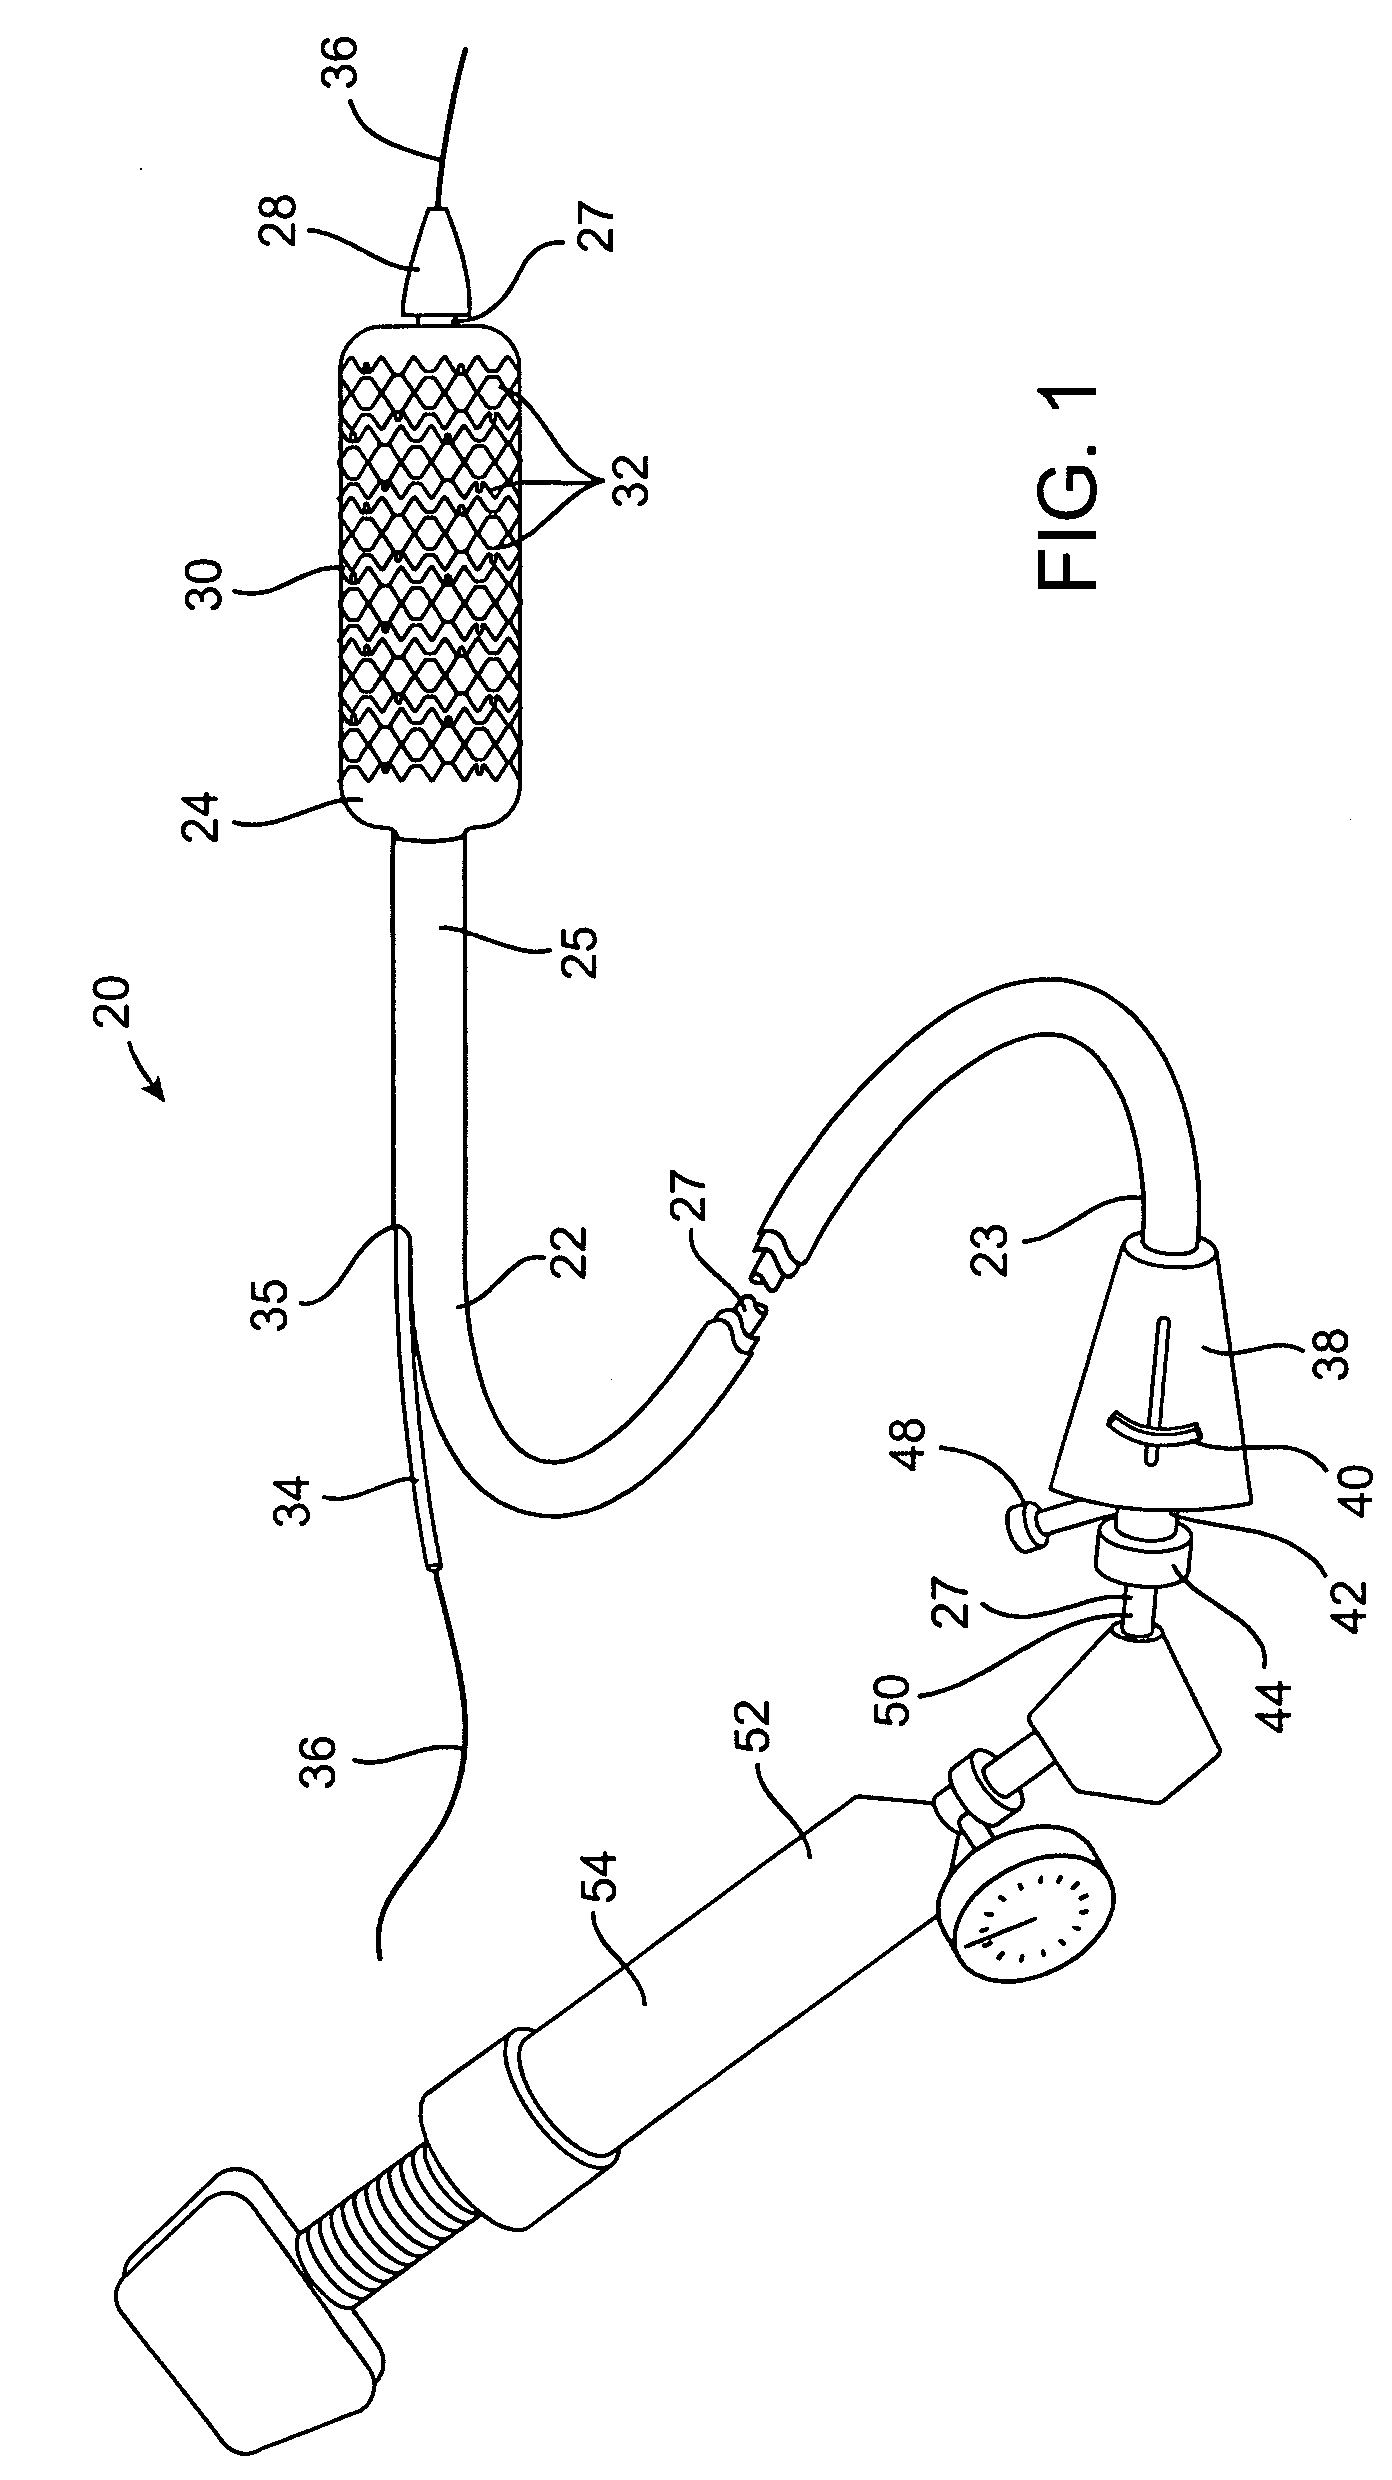 Apparatus and methods for deployment of vascular prostheses